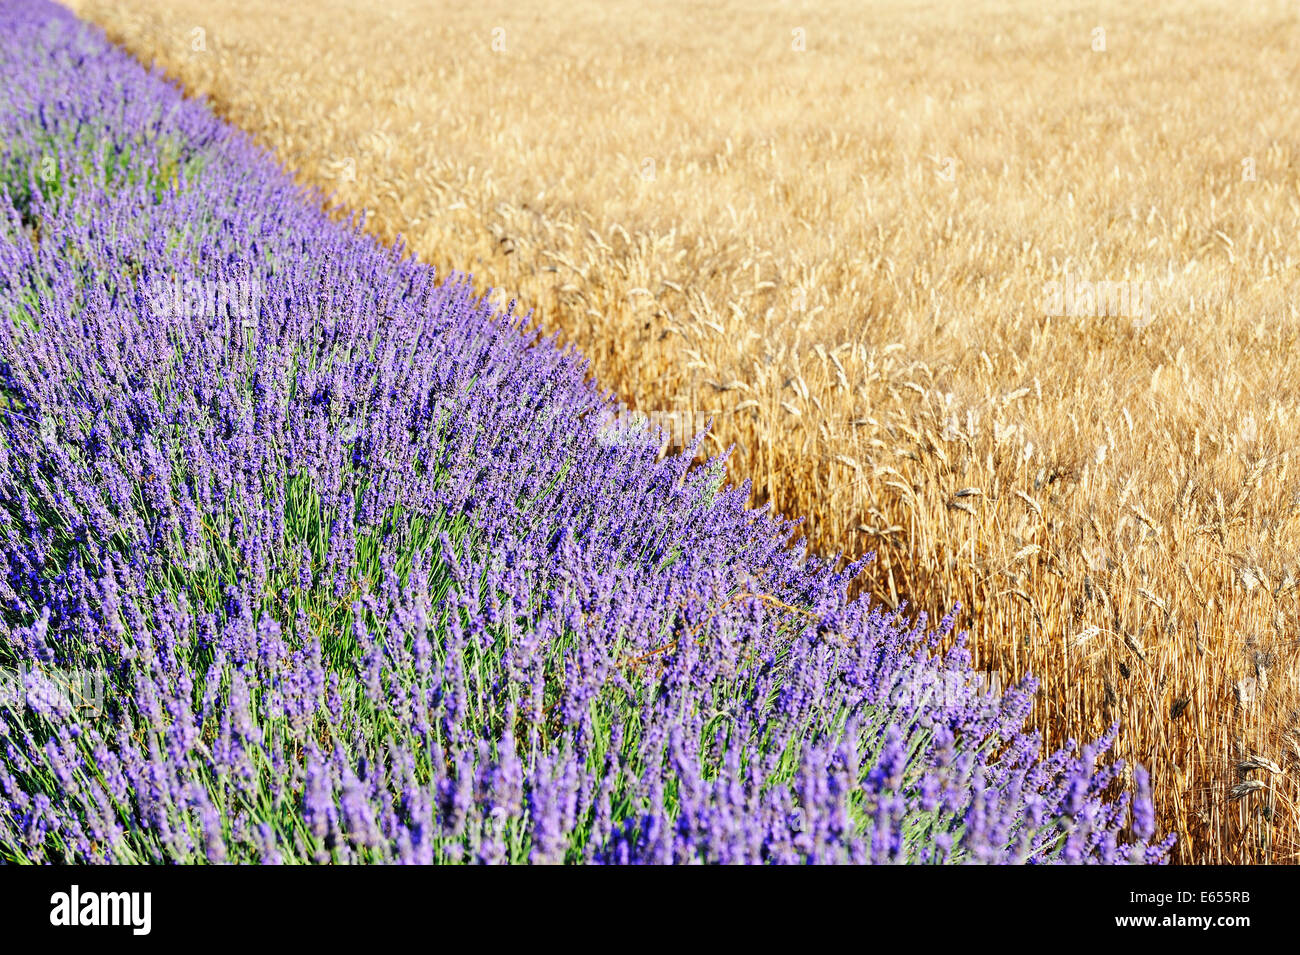 Summer season - Lavender and wheat field side by side, France, Europe Stock Photo